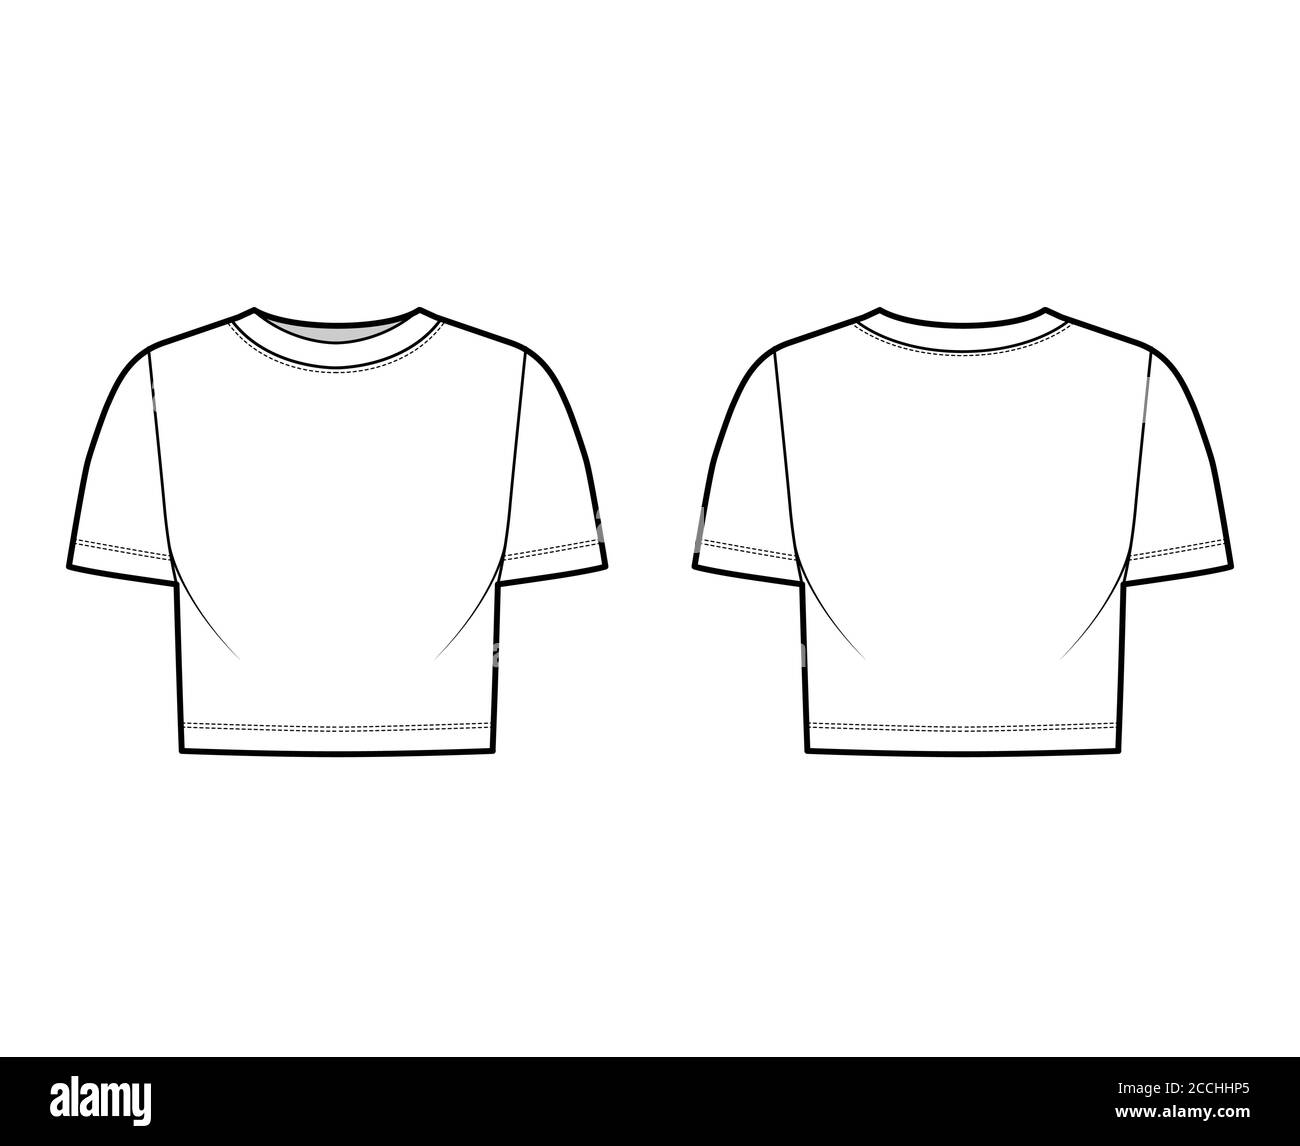 Cropped cotton-jersey t-shirt technical fashion illustration with scoop neck, short sleeves, relax fit. Flat outwear apparel template front, back, white color. Women, men, unisex top CAD mockup.  Stock Vector